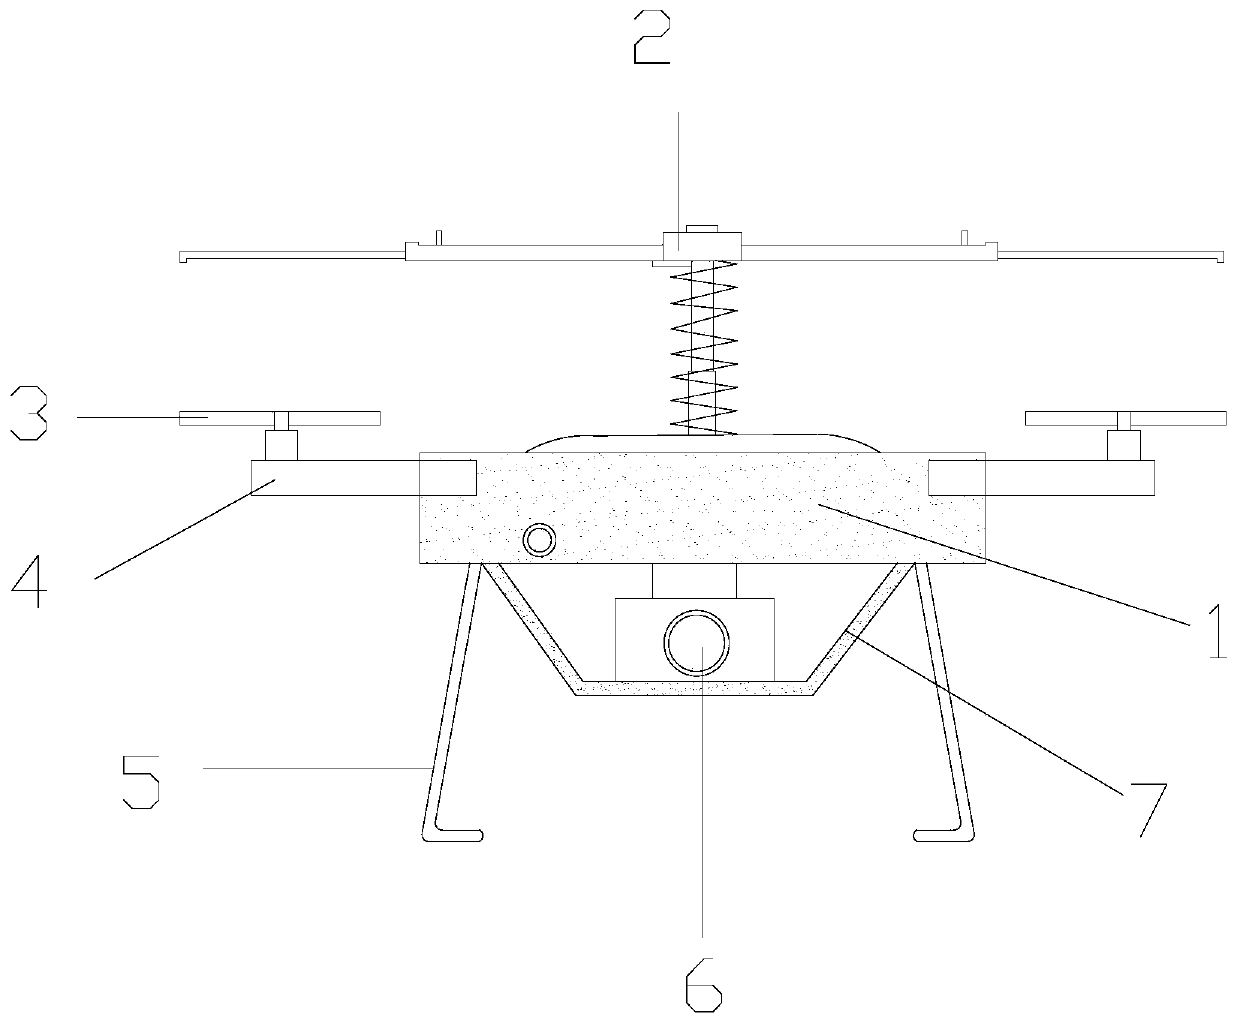 An aerial camera with intelligent steering function